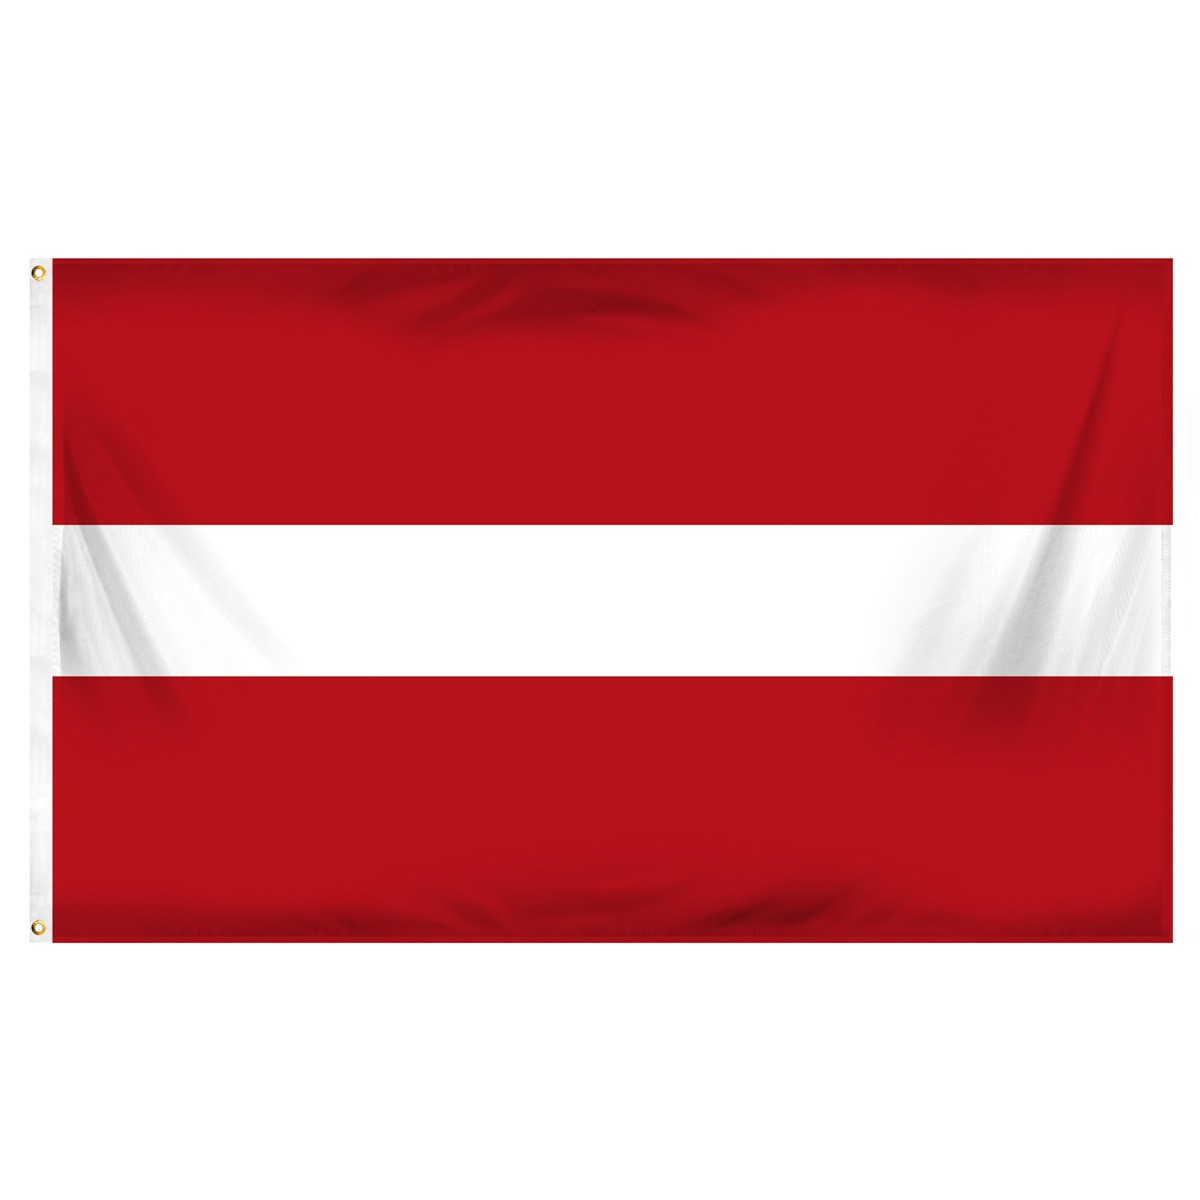 Latvia Submit Flags and Flags